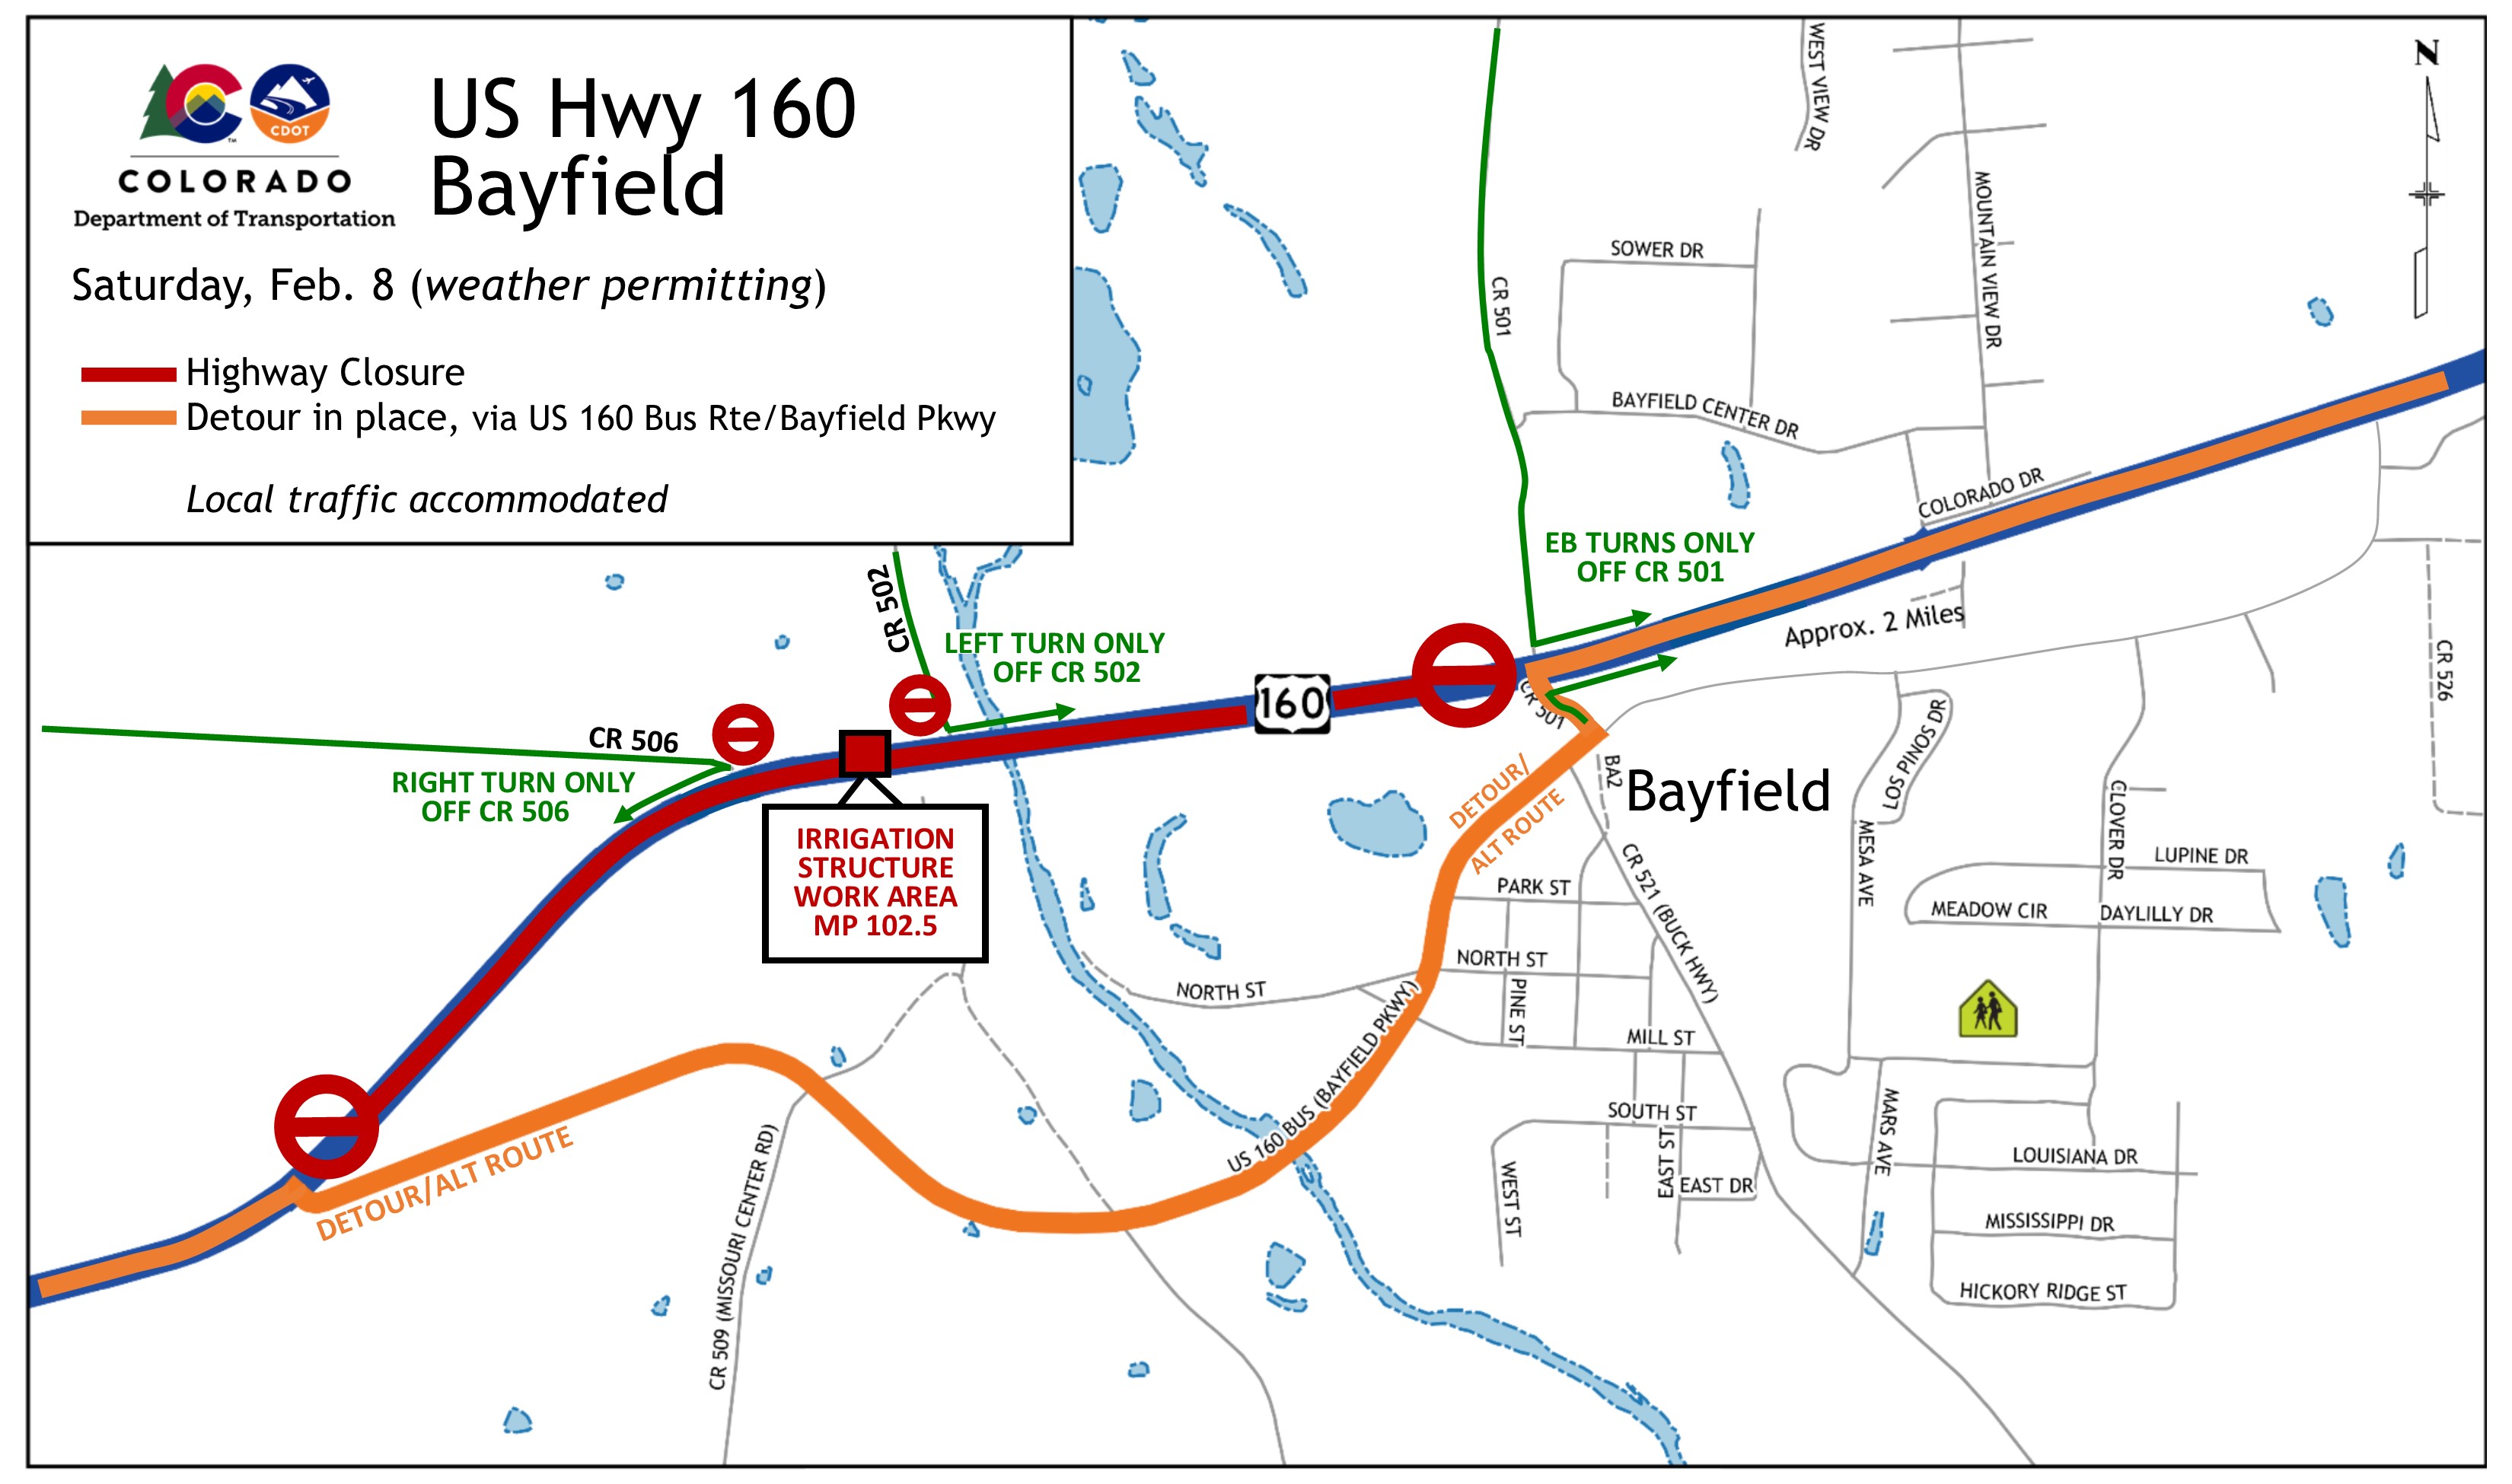 US 160 Bayfield road closures map on Saturday, Feb. 8 for irrigation structure work at Mile Point 102.5 detail image